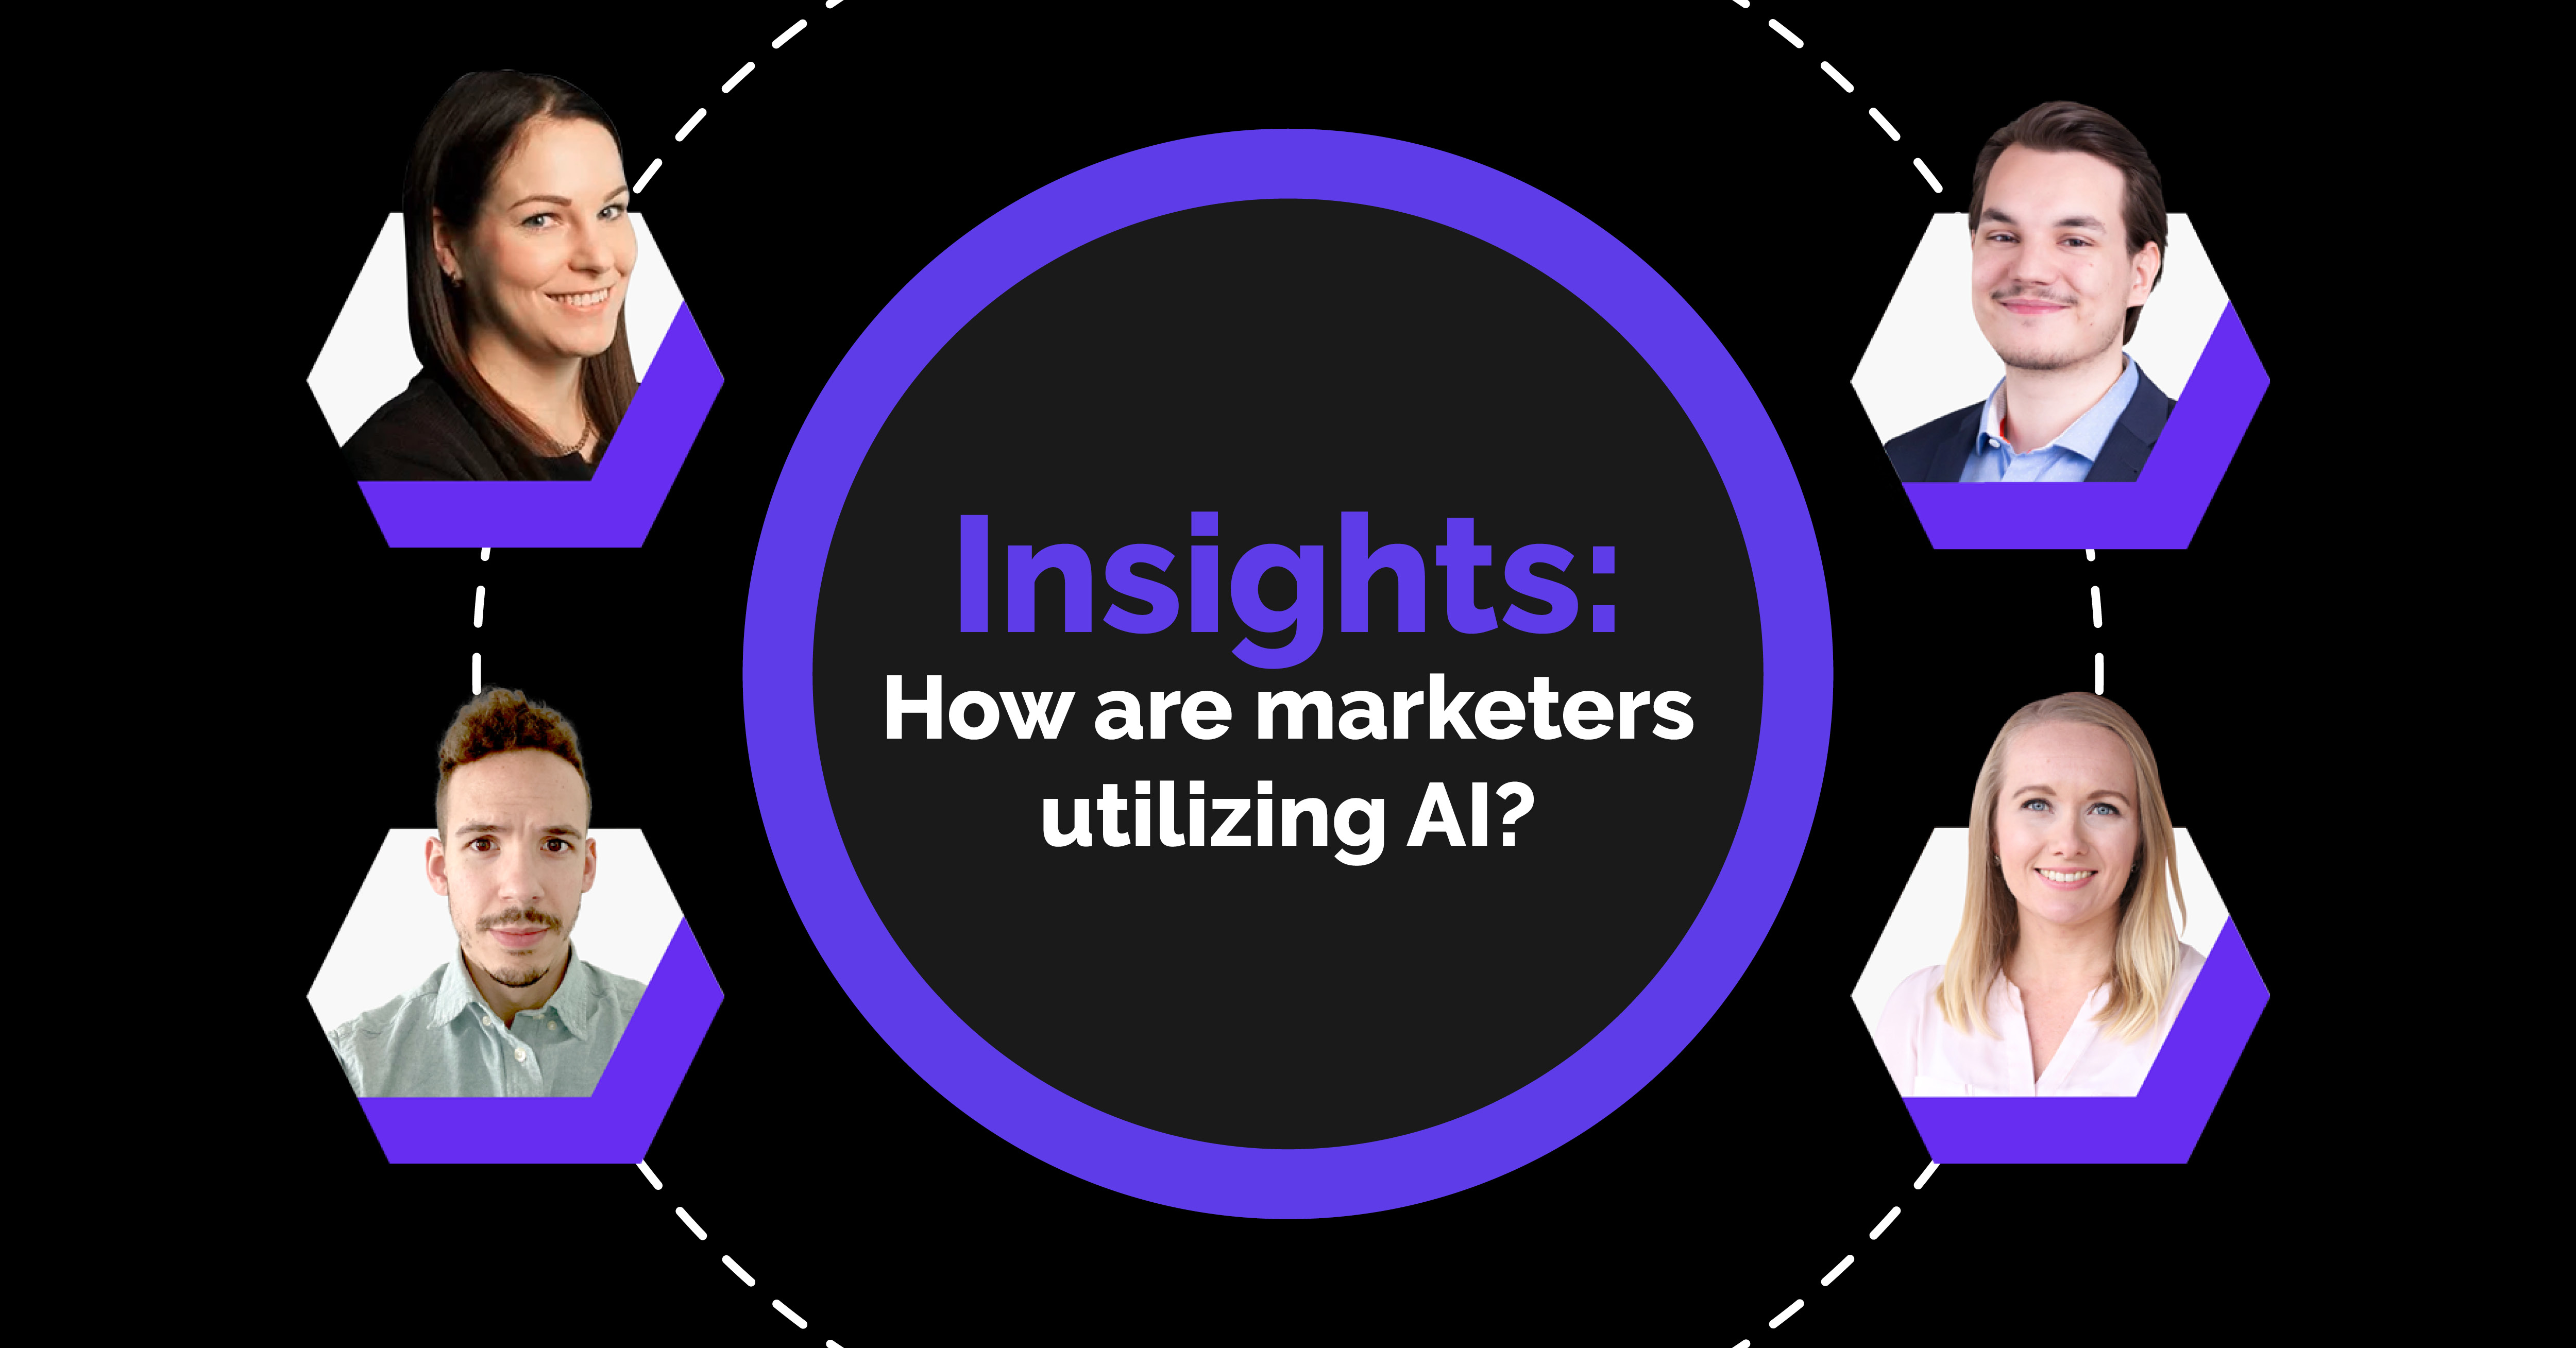 Marketers share insights on using AI